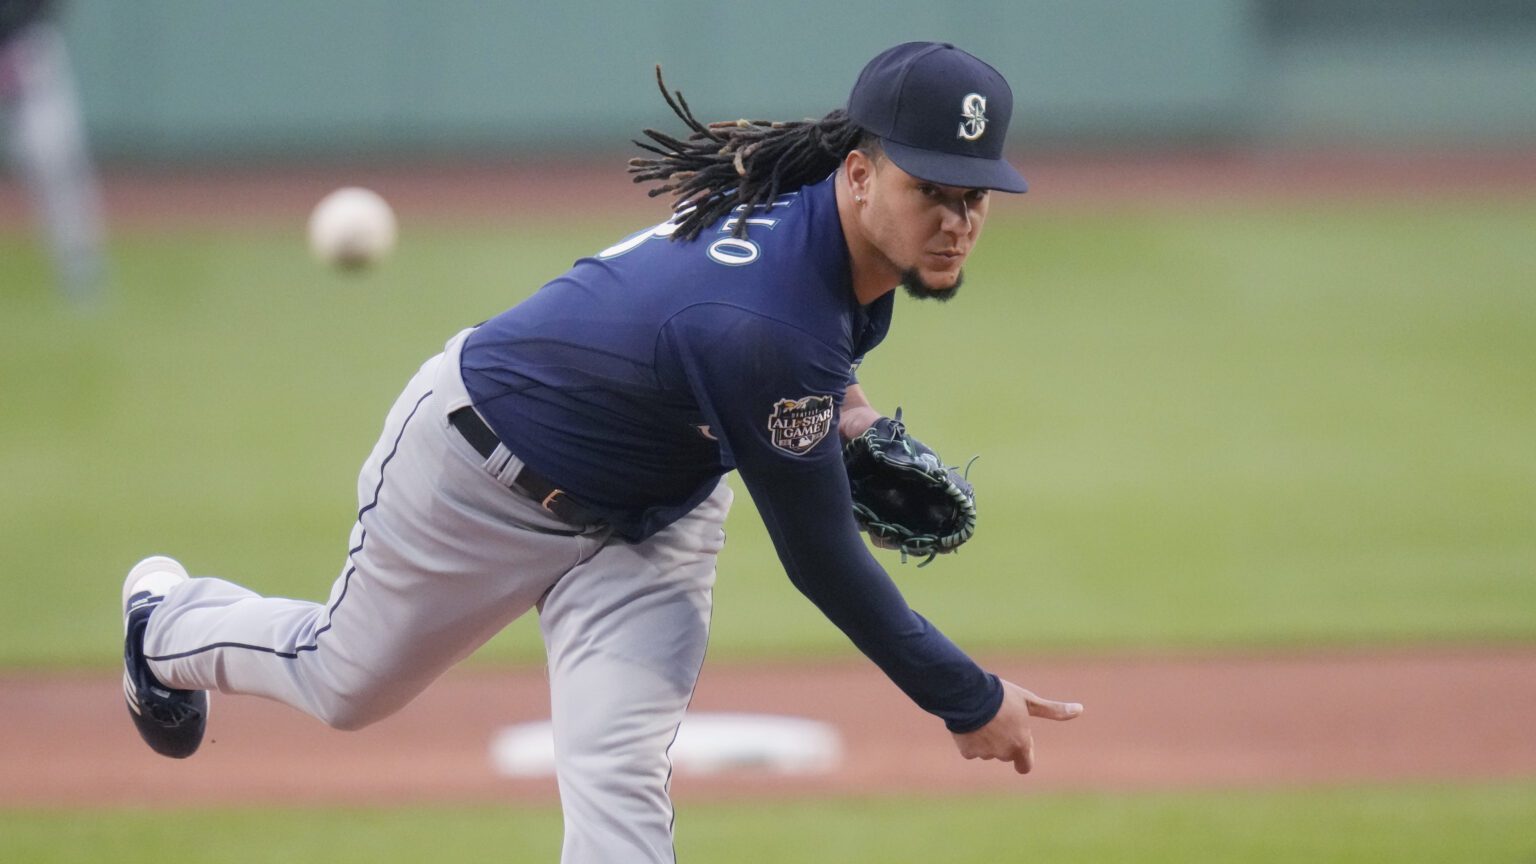 Seattle Mariners starting pitcher Luis Castillo delivers against the Boston Red Sox during the first inning of a baseball game May 16 at Fenway Park in Boston.